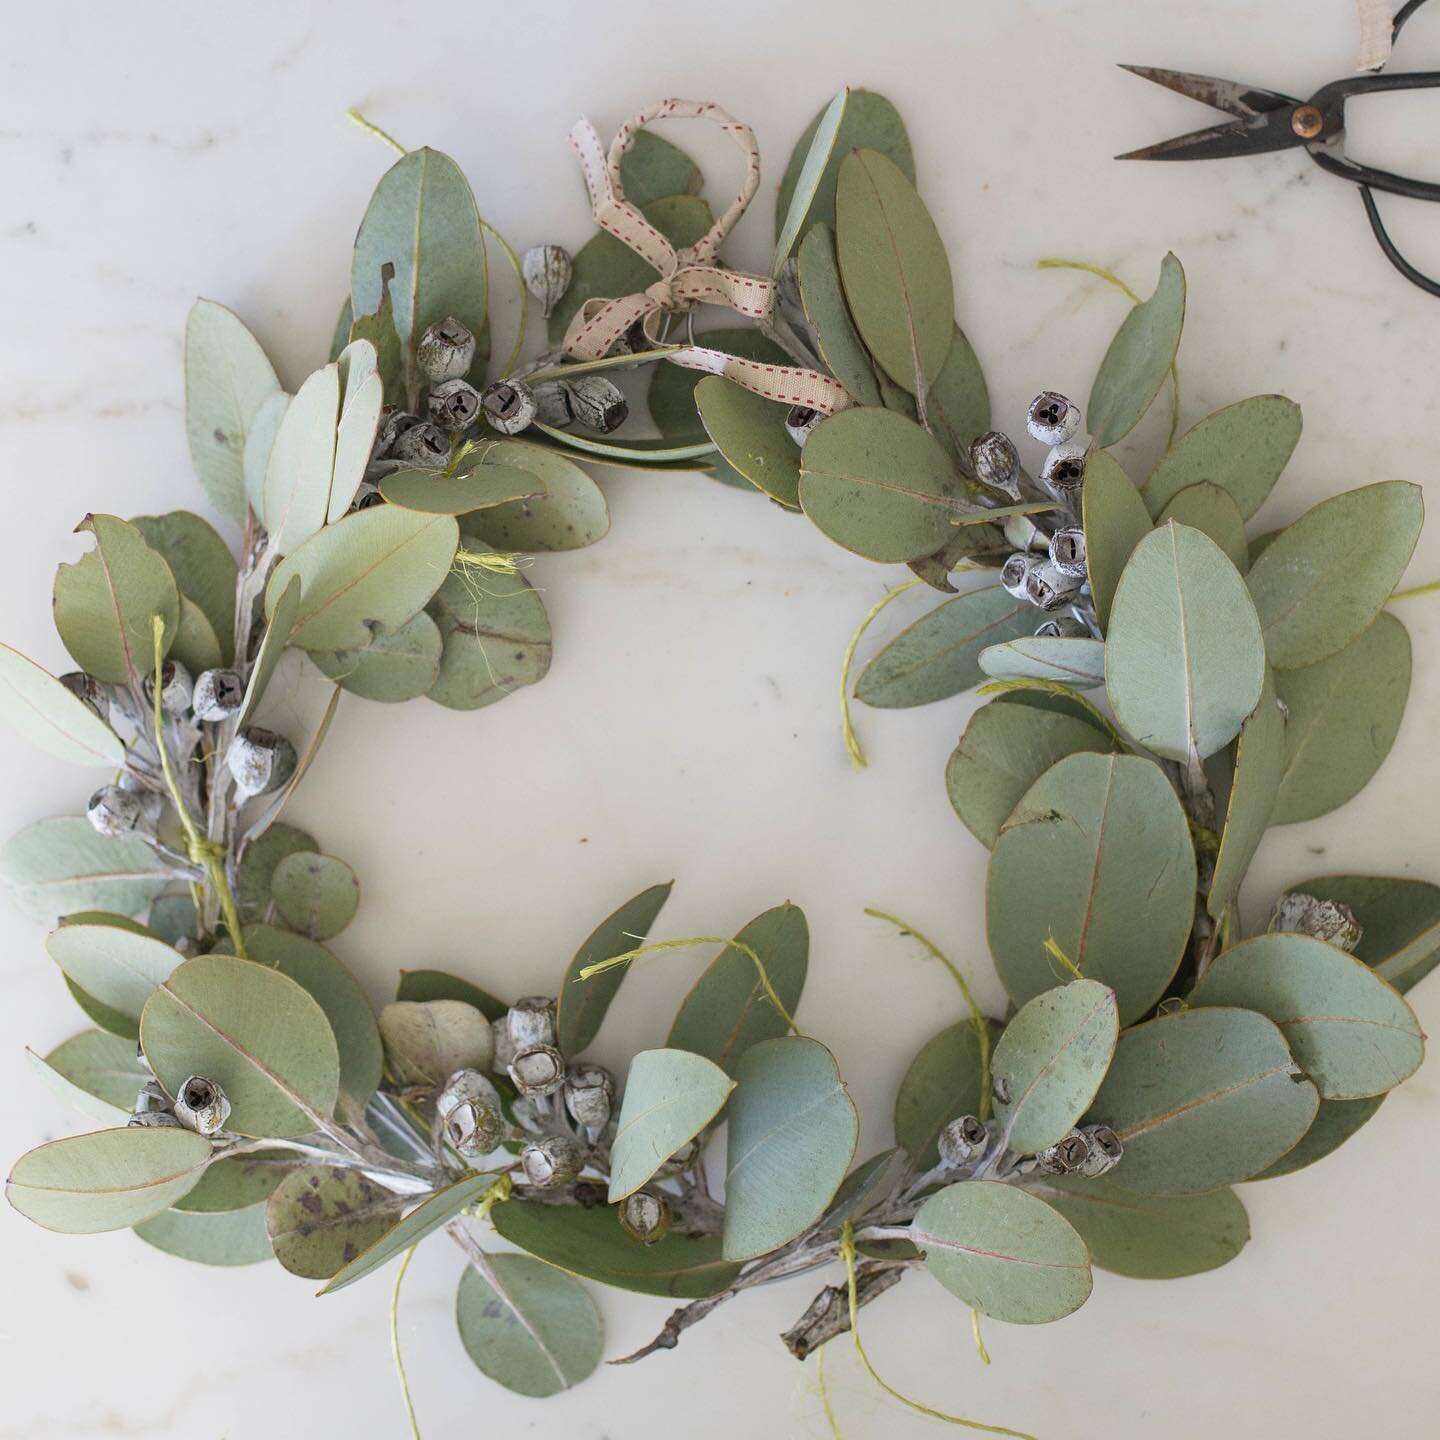 A simple upcycle Christmas I love to do every year - making a Christmas wreath from a wire coat hanger - and wrapping it in foraged natives or herbs from the garden and using left over bits of ribbon from present wrapping to cover the wire at the top